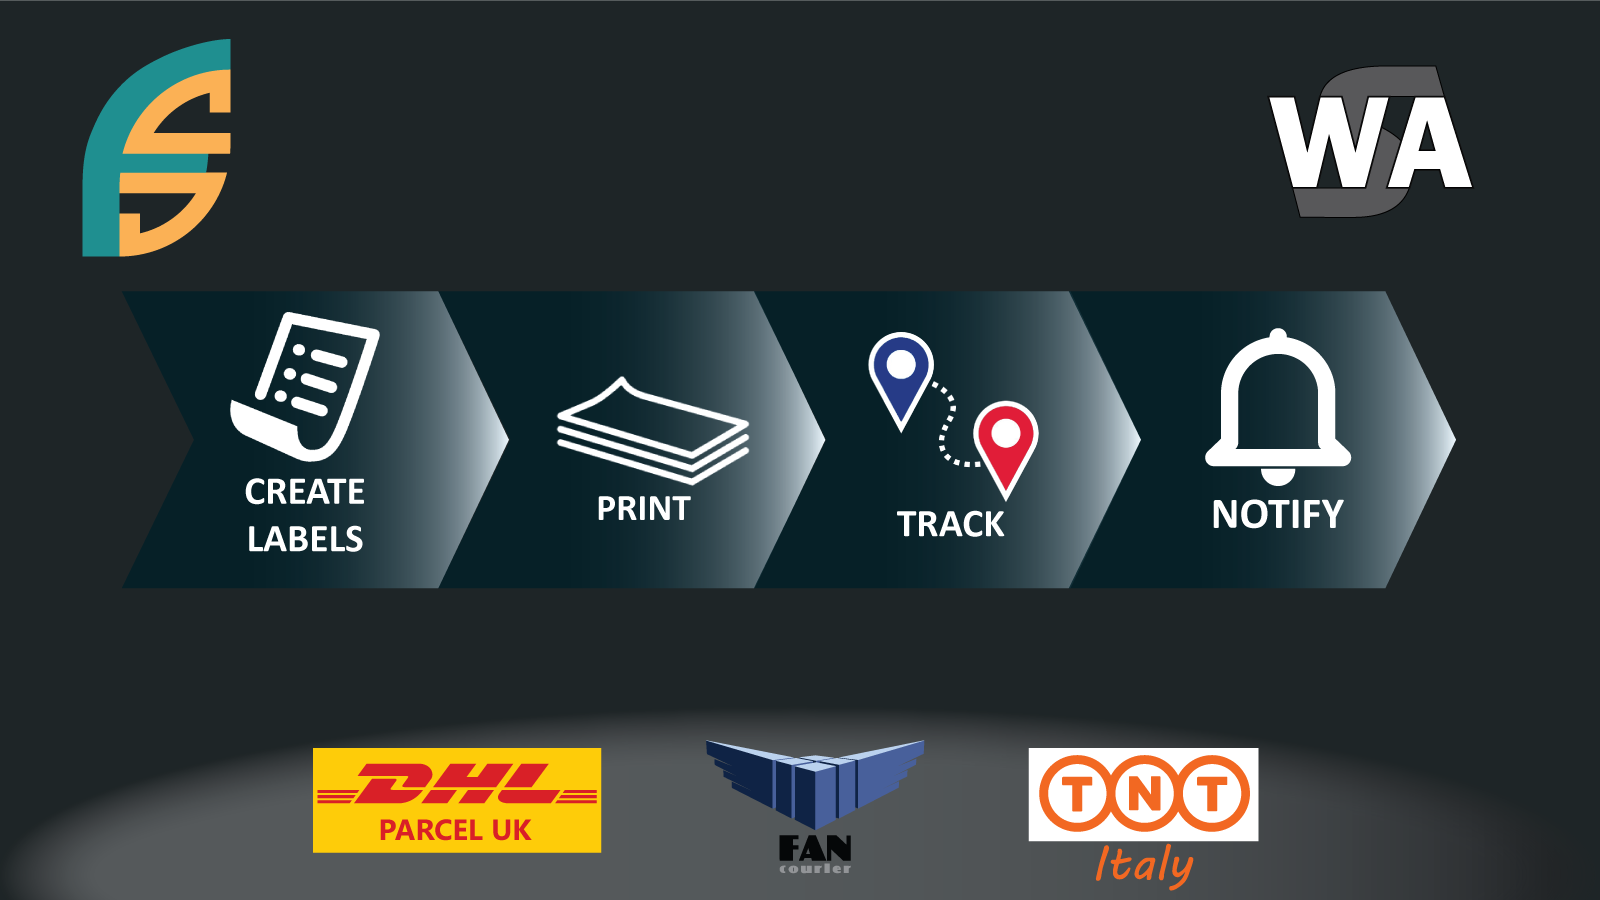 FanCourier, TNT and DHL create & print labels, tracking delivery